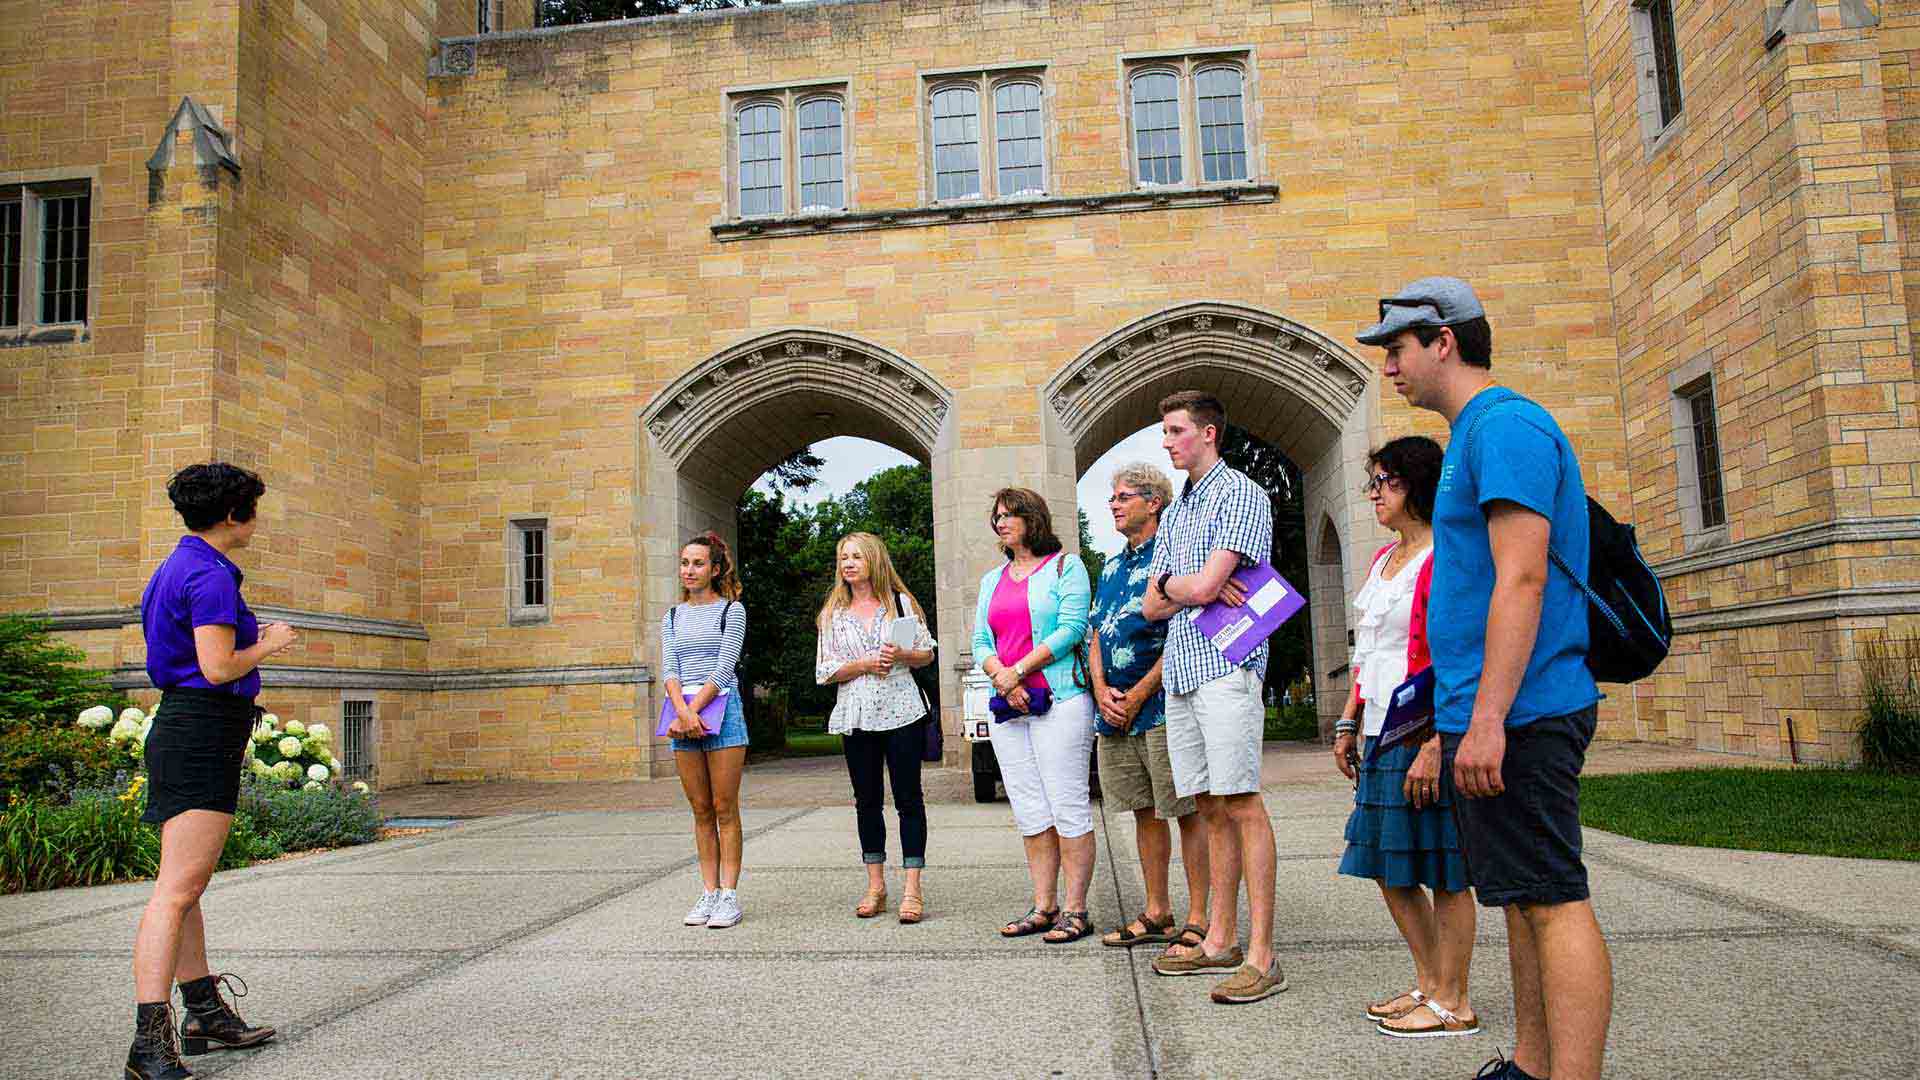 Tour guide gives a campus tour to high school students and parents. 